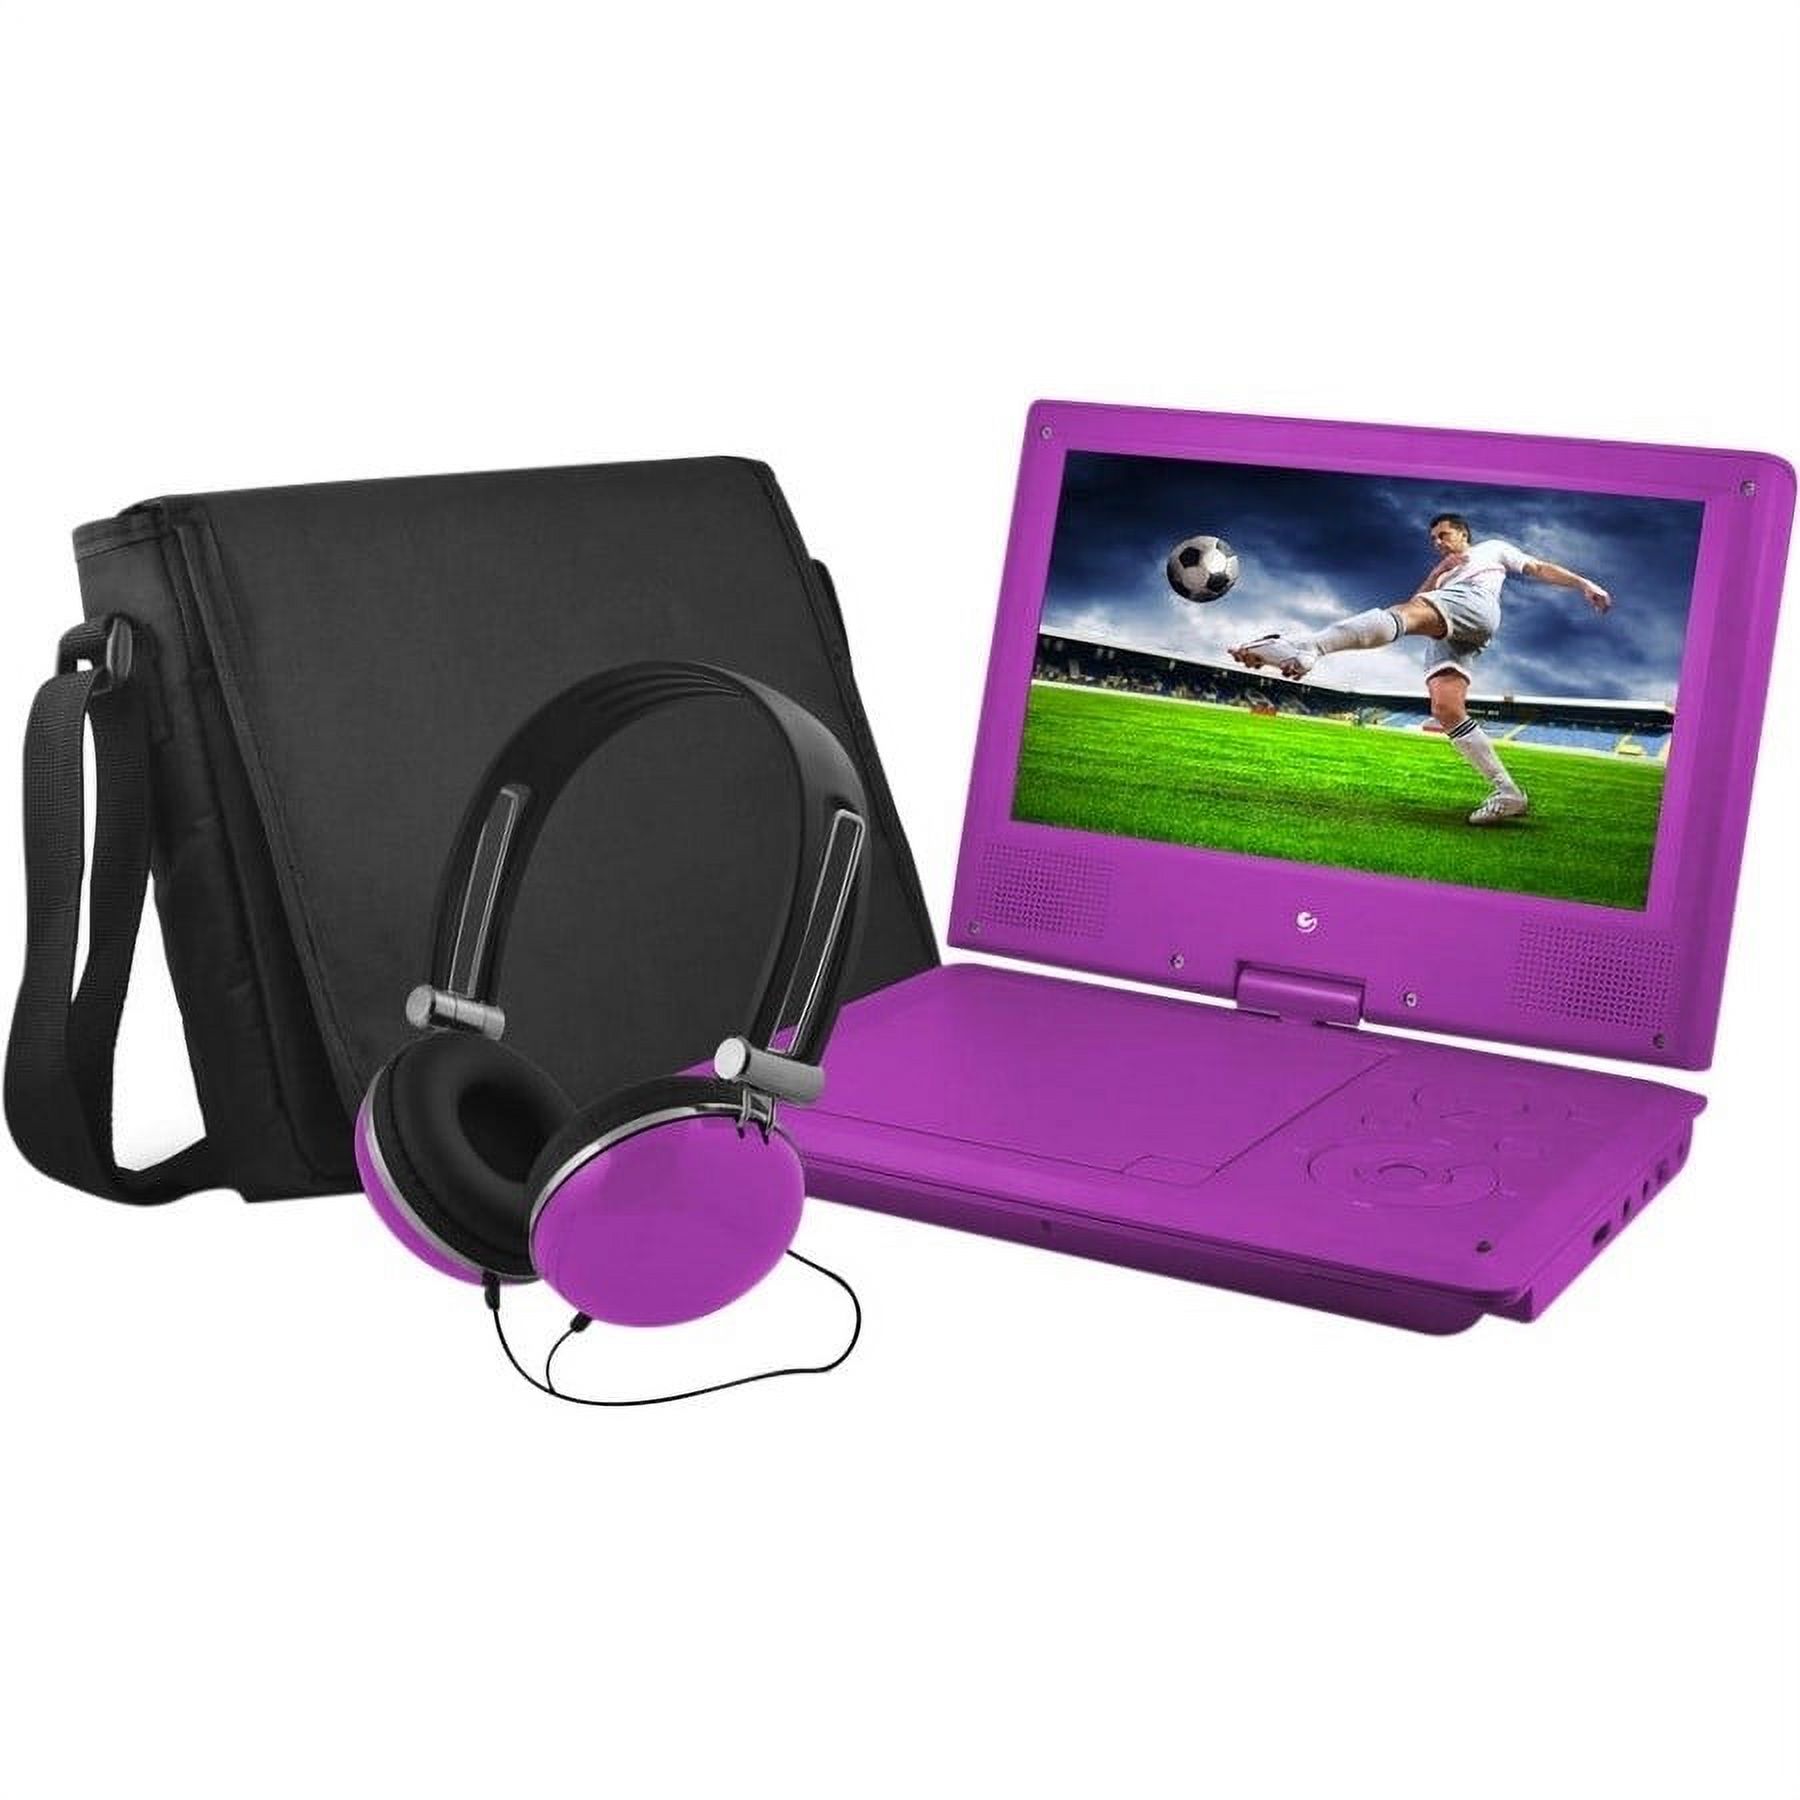 Ematic 9" Portable DVD Player with Matching Headphones and Bag - EPD909pr - image 1 of 30